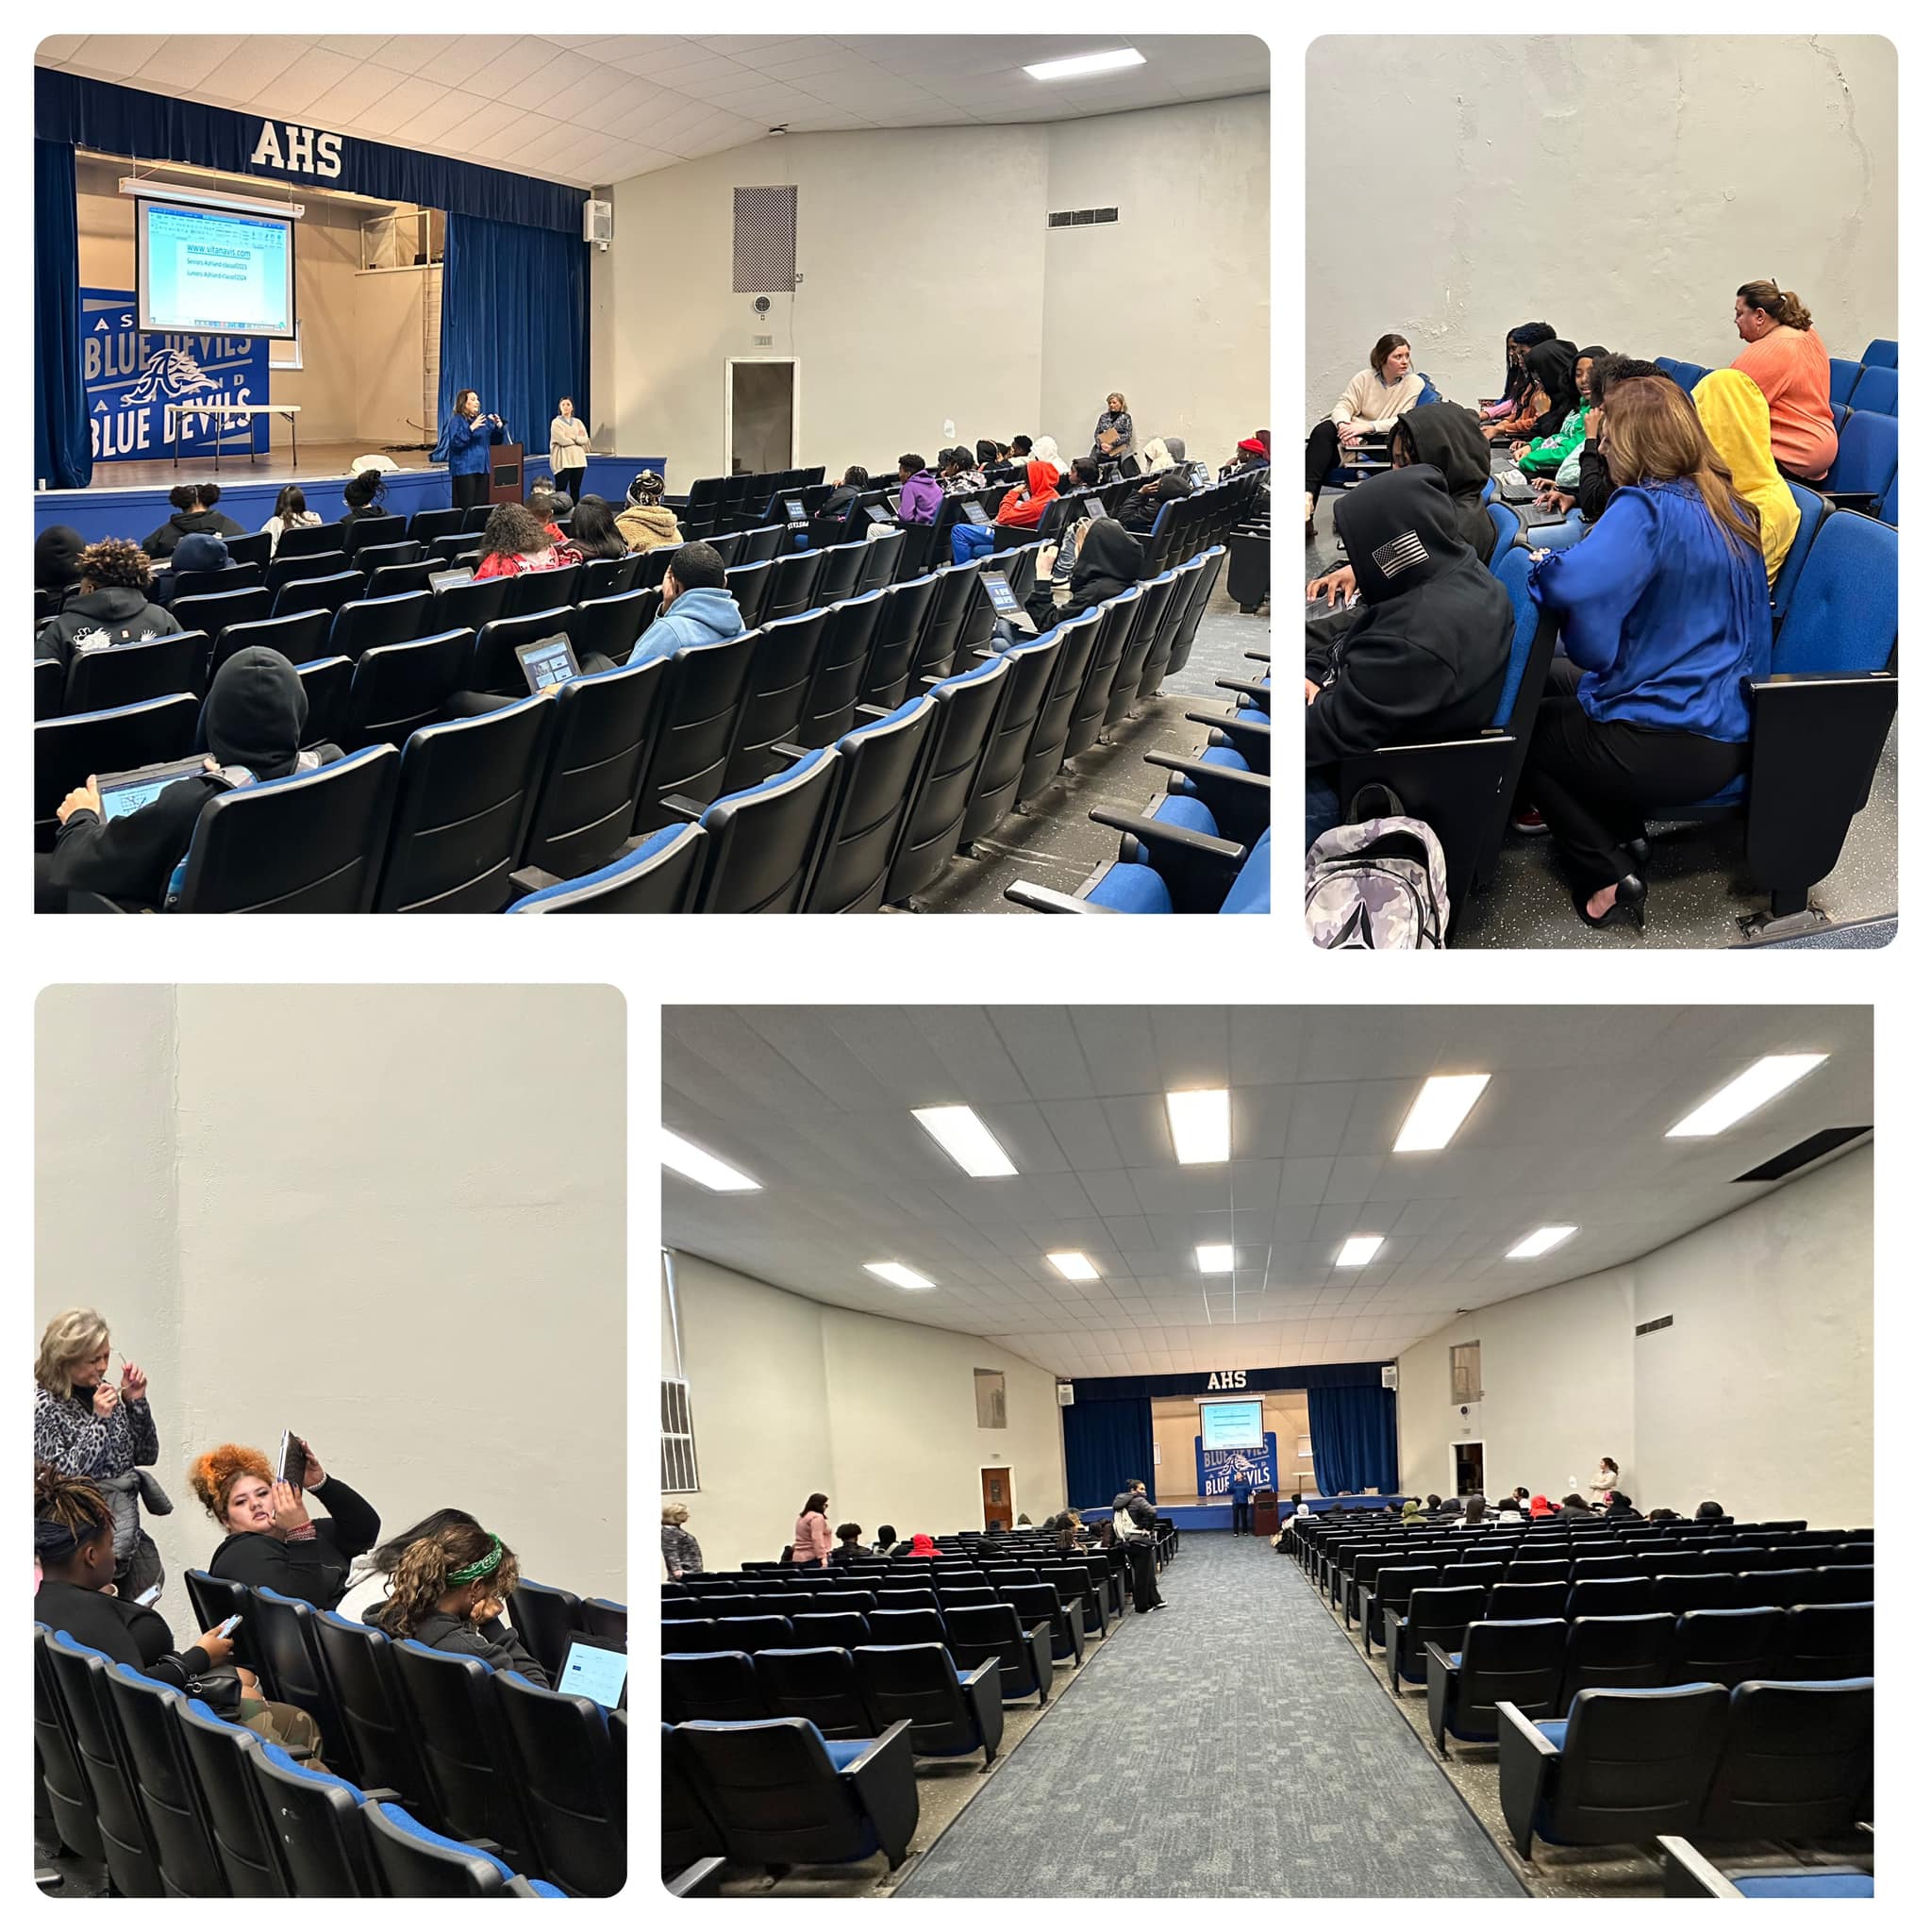 Students in grades 7-12 met with Mrs. Alicia Thompson and Mrs. Kaitlyn Cox from the Myers Briggs Company today to investigate their career interests through the VitaNavis Platform. This is the kickstart to our commitment that every student that leaves Ashland High School will be prepared for their next step in life, no matter if it’s to a career, technical/trade school, or college or university. Huge thanks to the teachers, AHS counselor- Mrs. Teresa Elam, career coach- Ms. Meg Thomas, teacher- Ms. Jessica Terry, and curriculum coordinator - Amanda Ford for helping get the students log in and navigate through the platform!